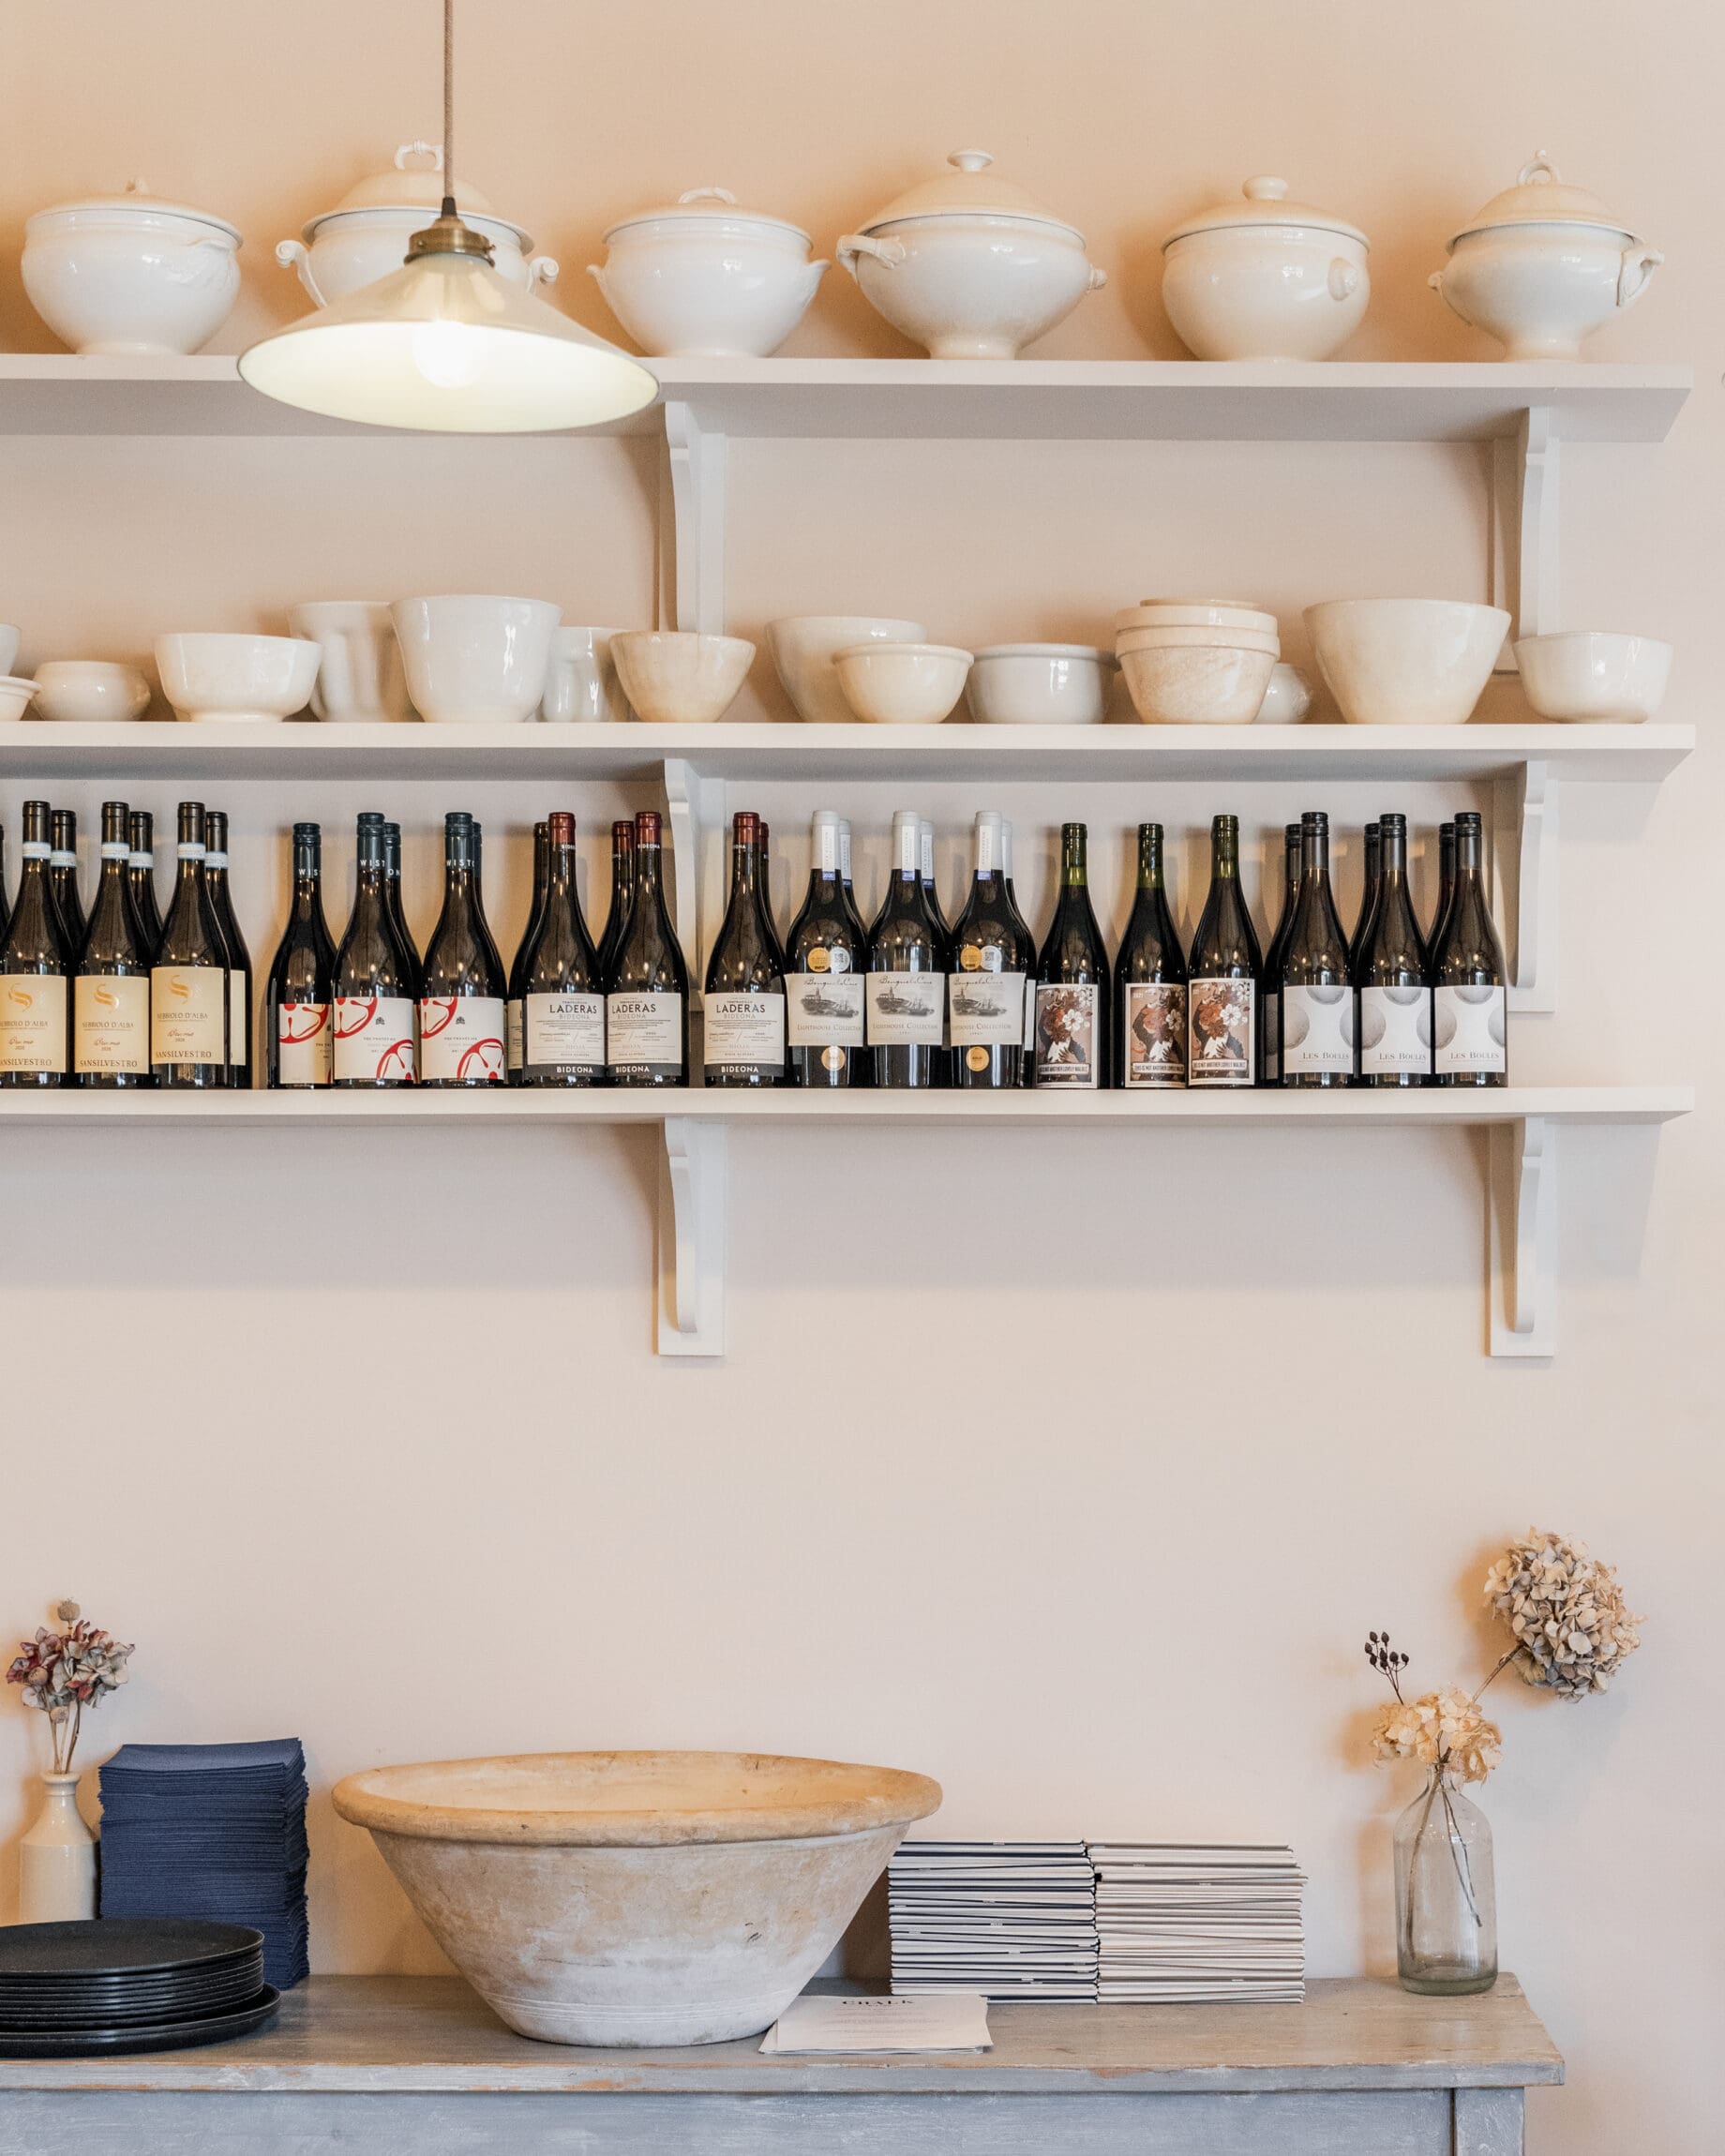 The best farm-to-table restaurants in the UK | Bottles lined on a neutral shelf at Chalk, Wiston Estate